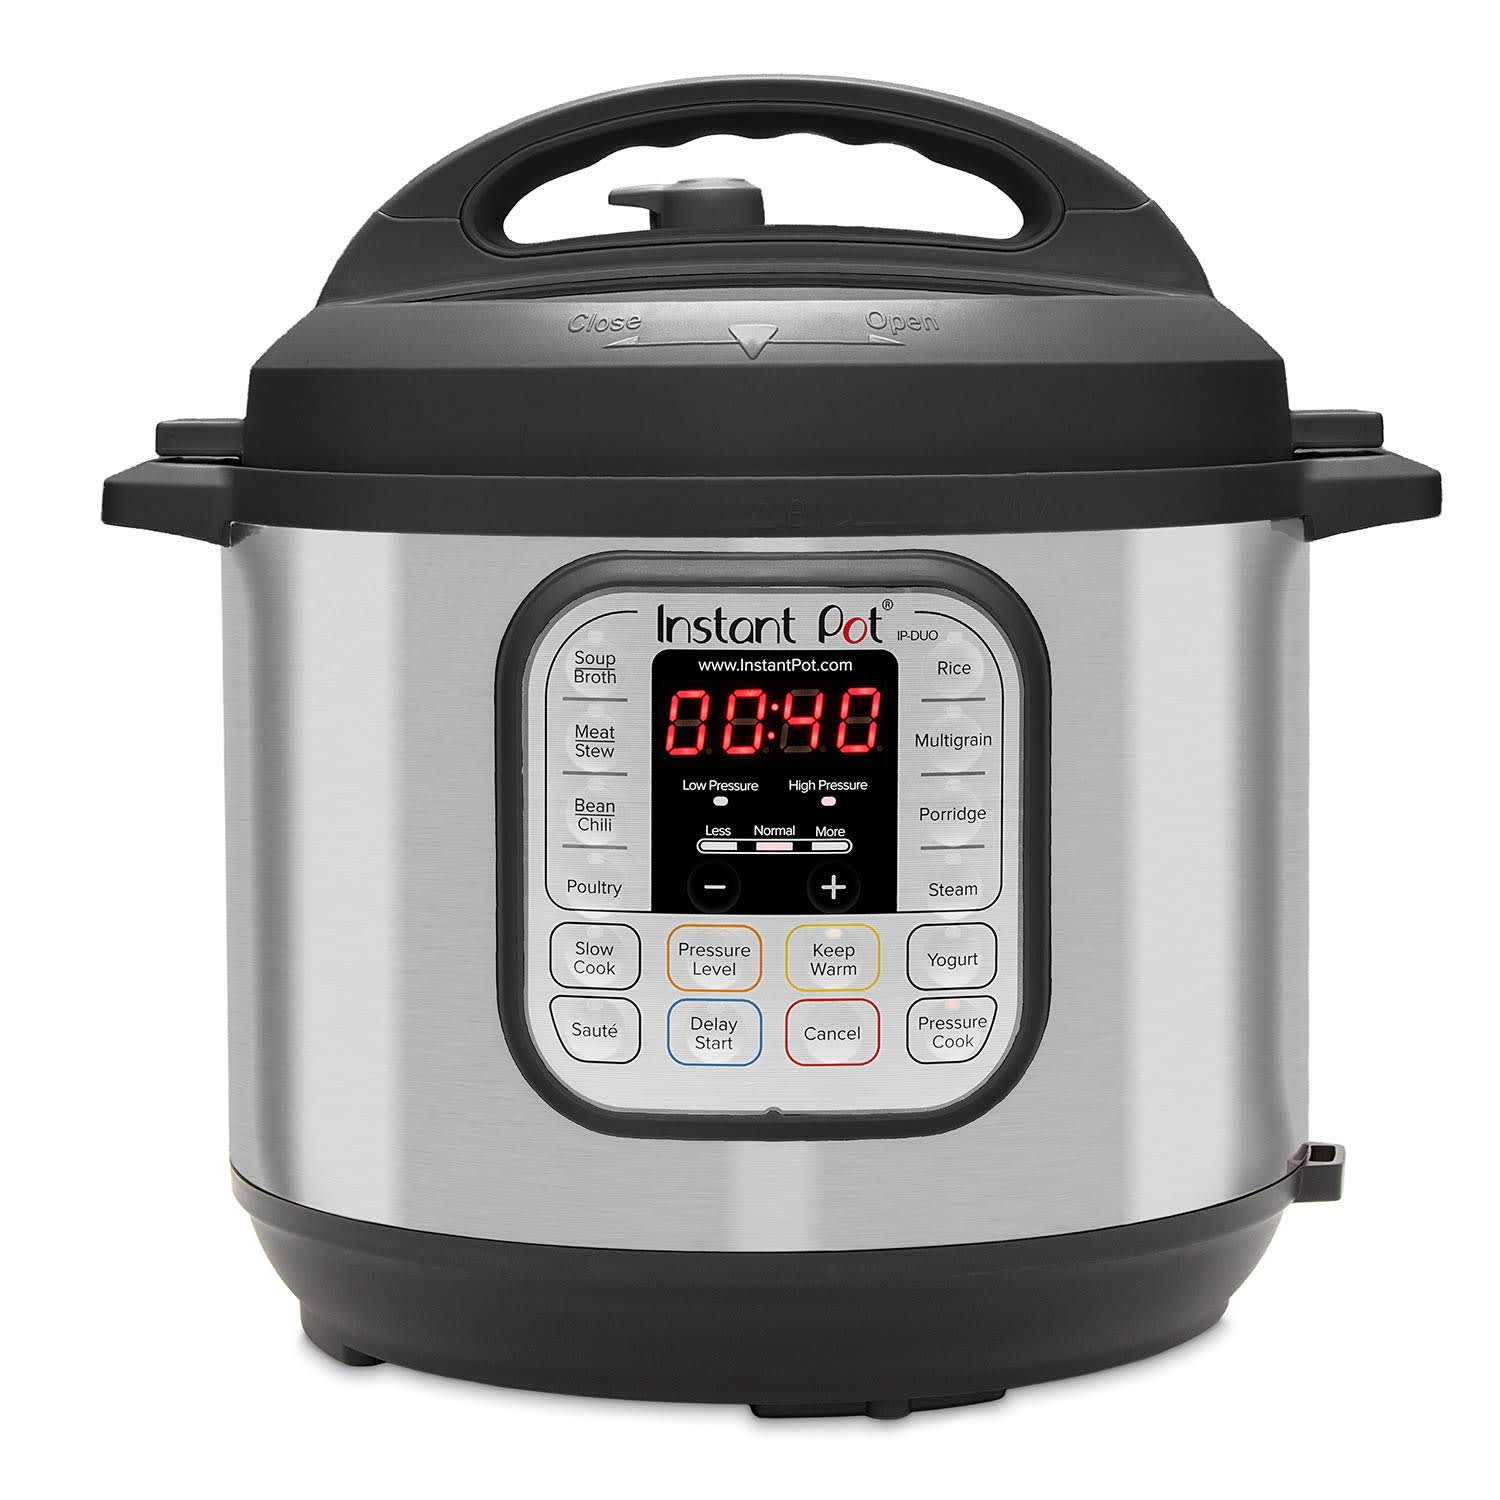 Slow Cooker vs. Instant Pot: What's the Difference?